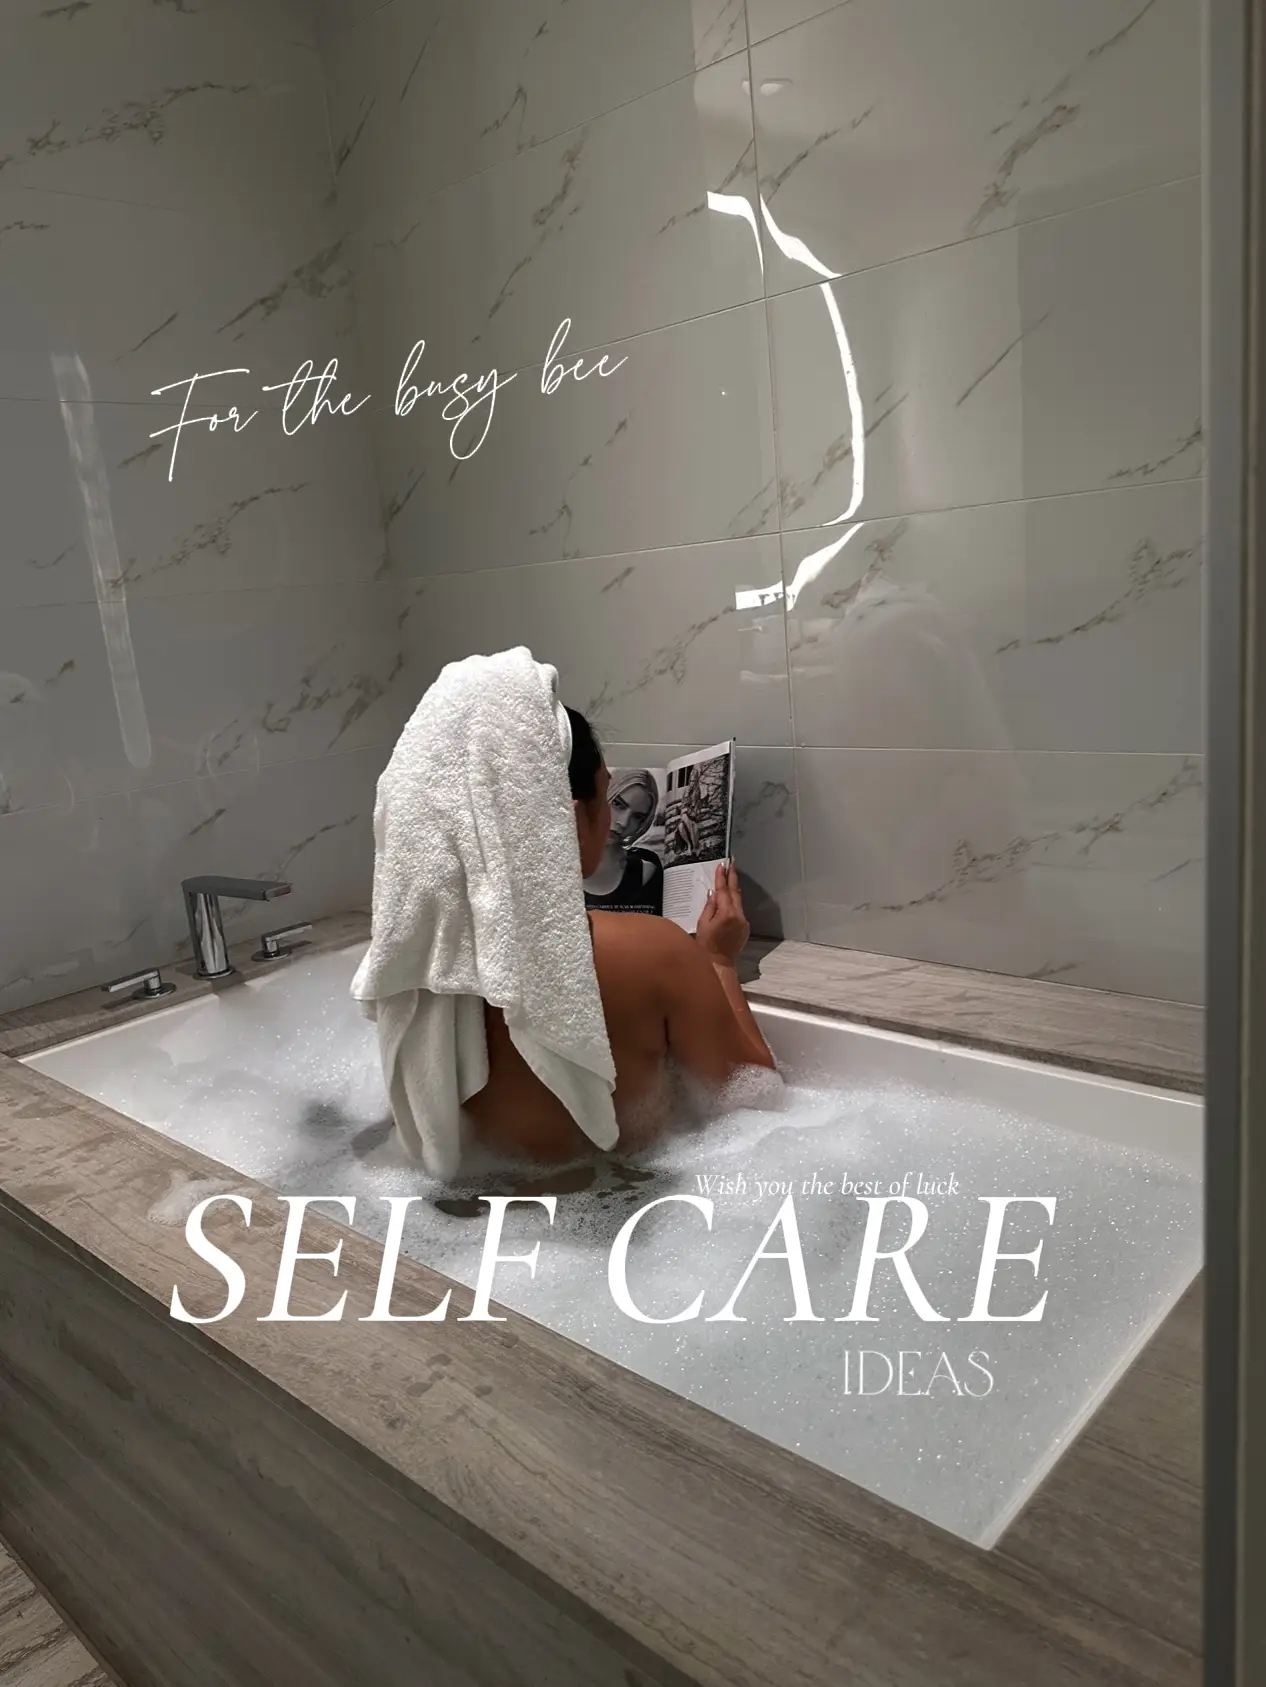 Self care ideas for the busy bee's images